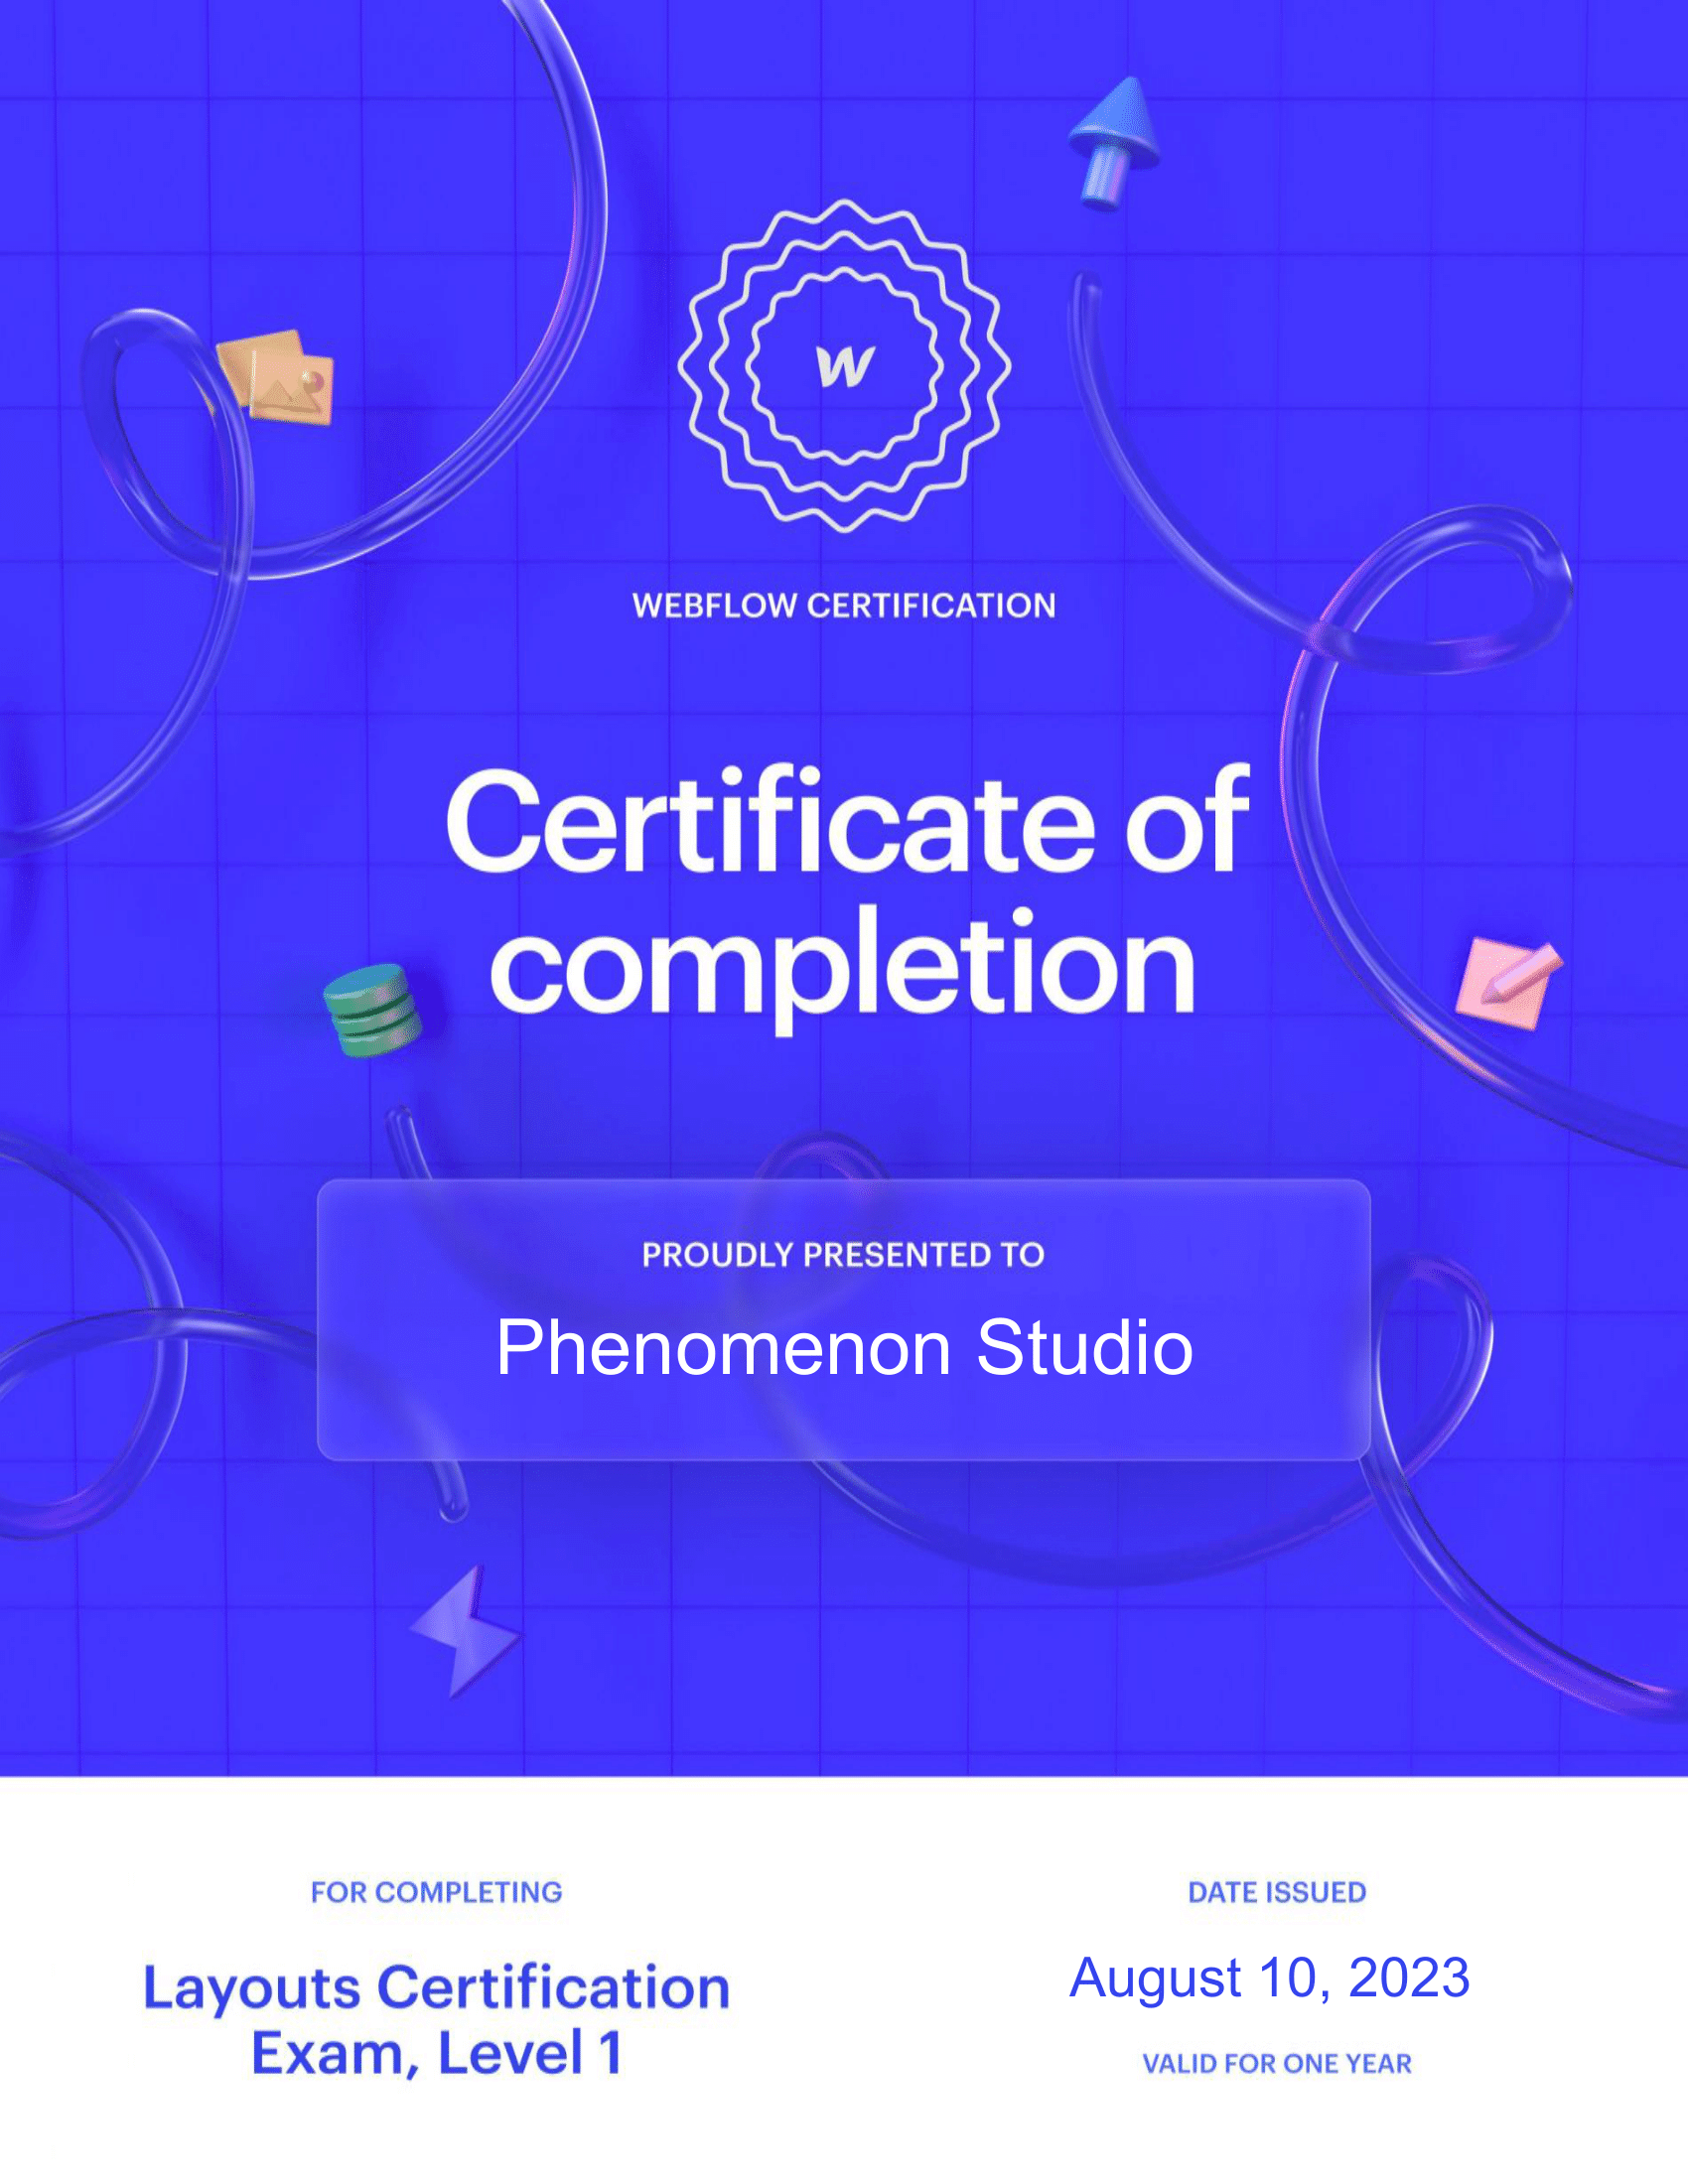 Phenomenon has received newly released Webflow certificates - Photo 1